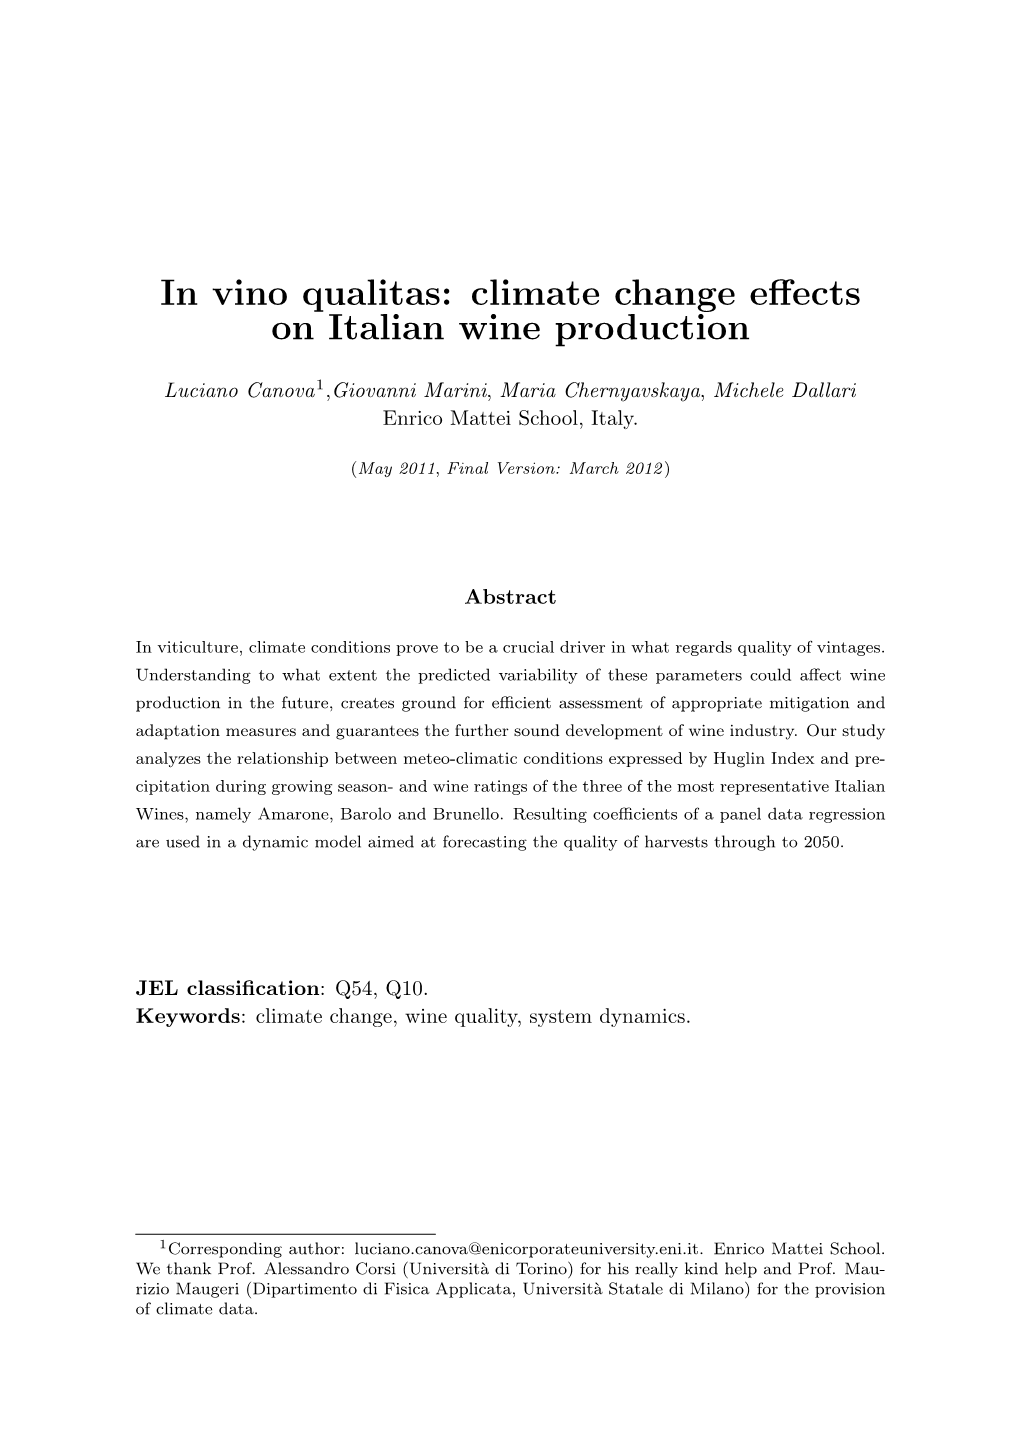 Climate Change Effects on Italian Wine Production